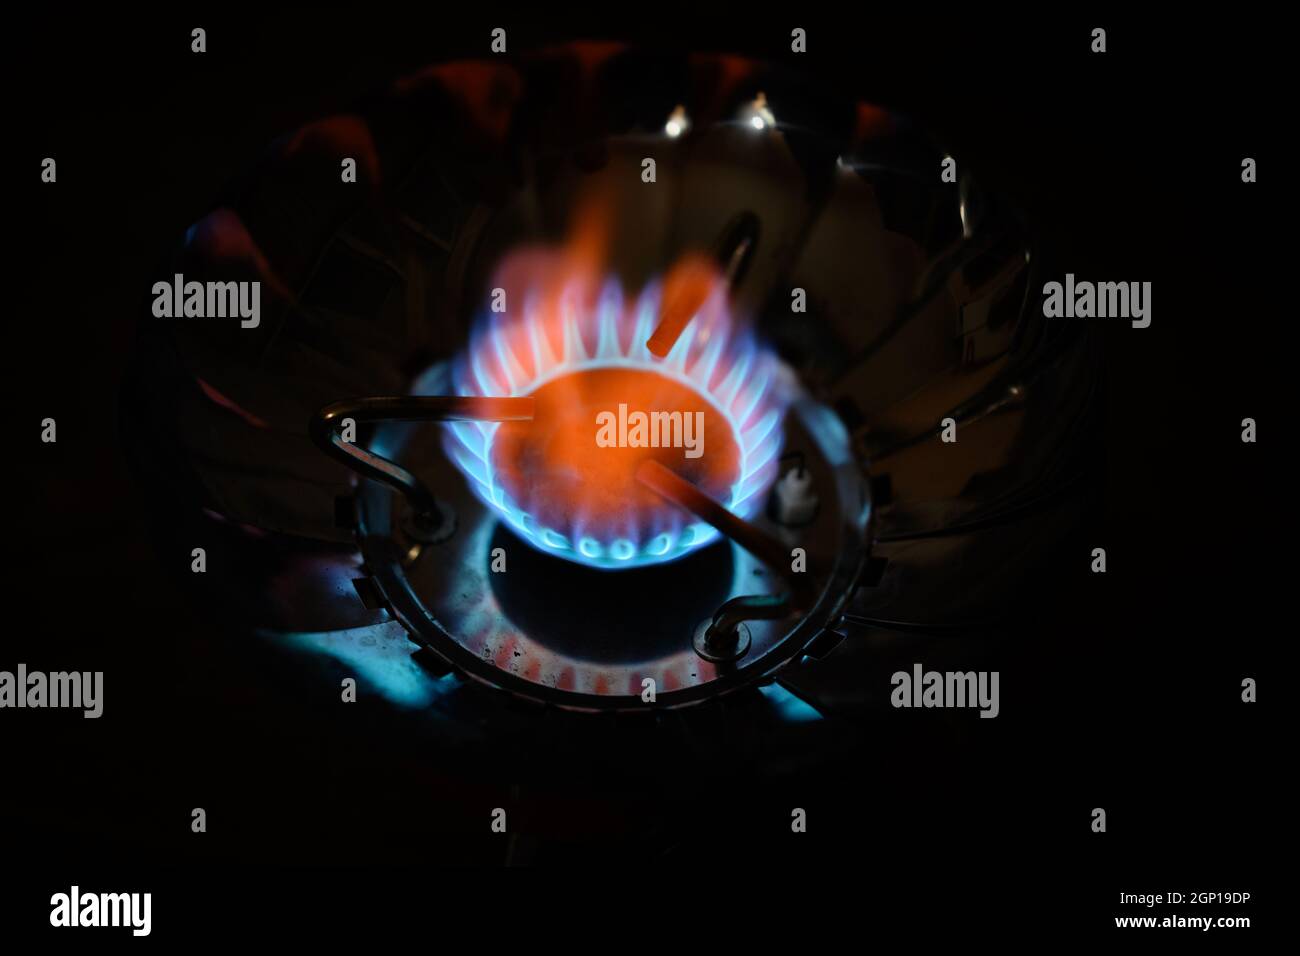 Blue flame gas stove in the dark. Selective focus with shallow depth of field. Stock Photo